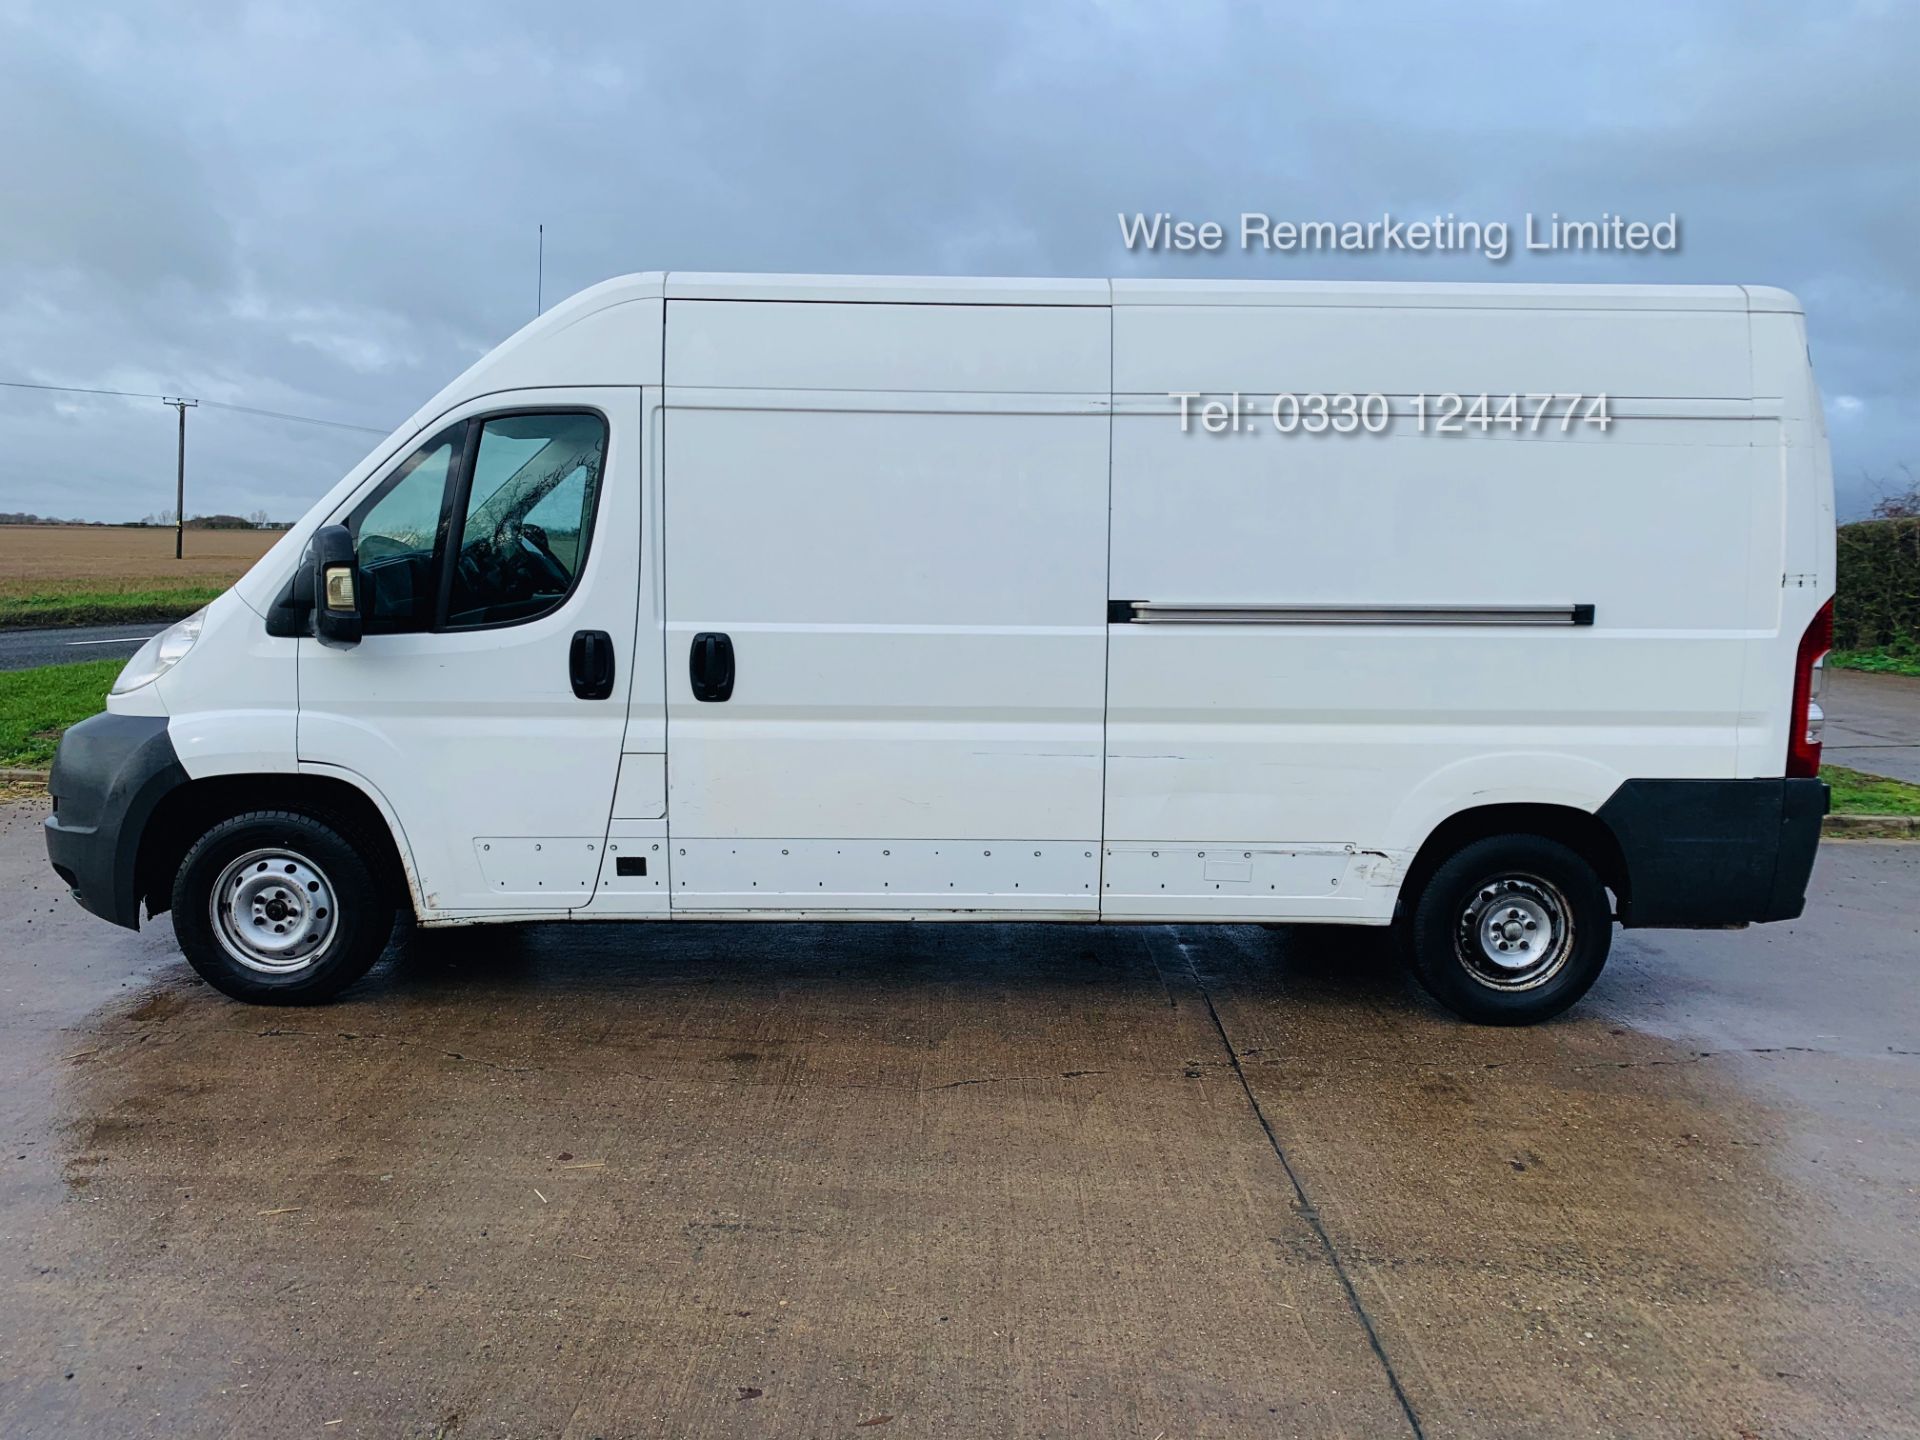 Peugeot Boxer 335 2.2 HDi Long Wheel Base 2014 Reg - 1 Keeper From New - Image 2 of 17